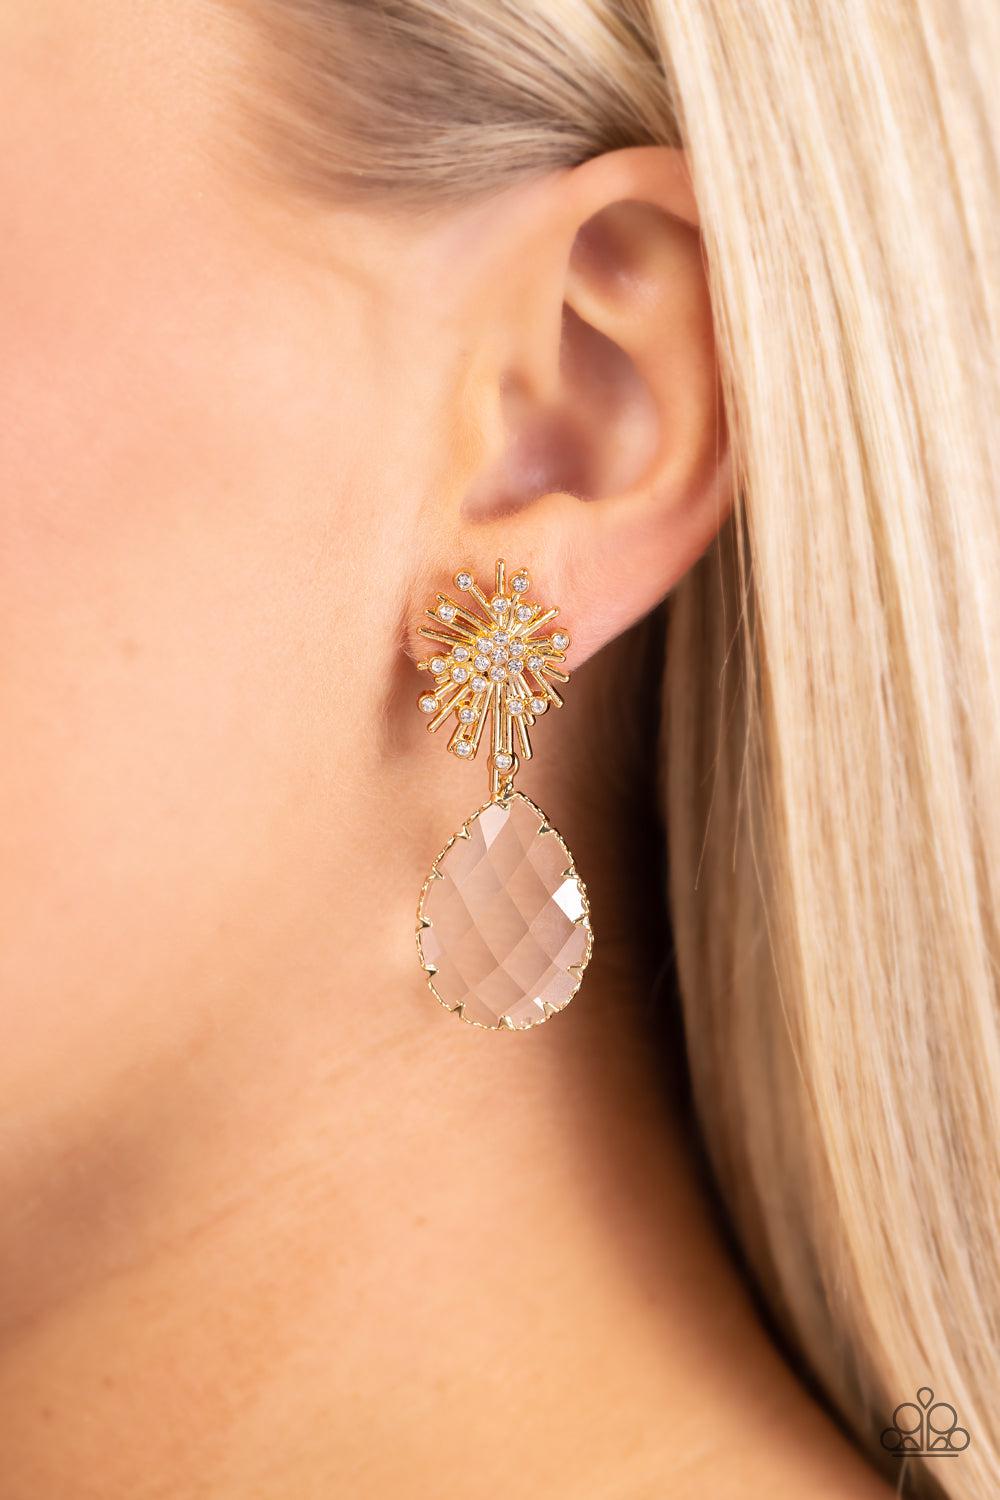 Stellar Shooting Star Gold & White Gem Earrings - Paparazzi Accessories- lightbox - CarasShop.com - $5 Jewelry by Cara Jewels